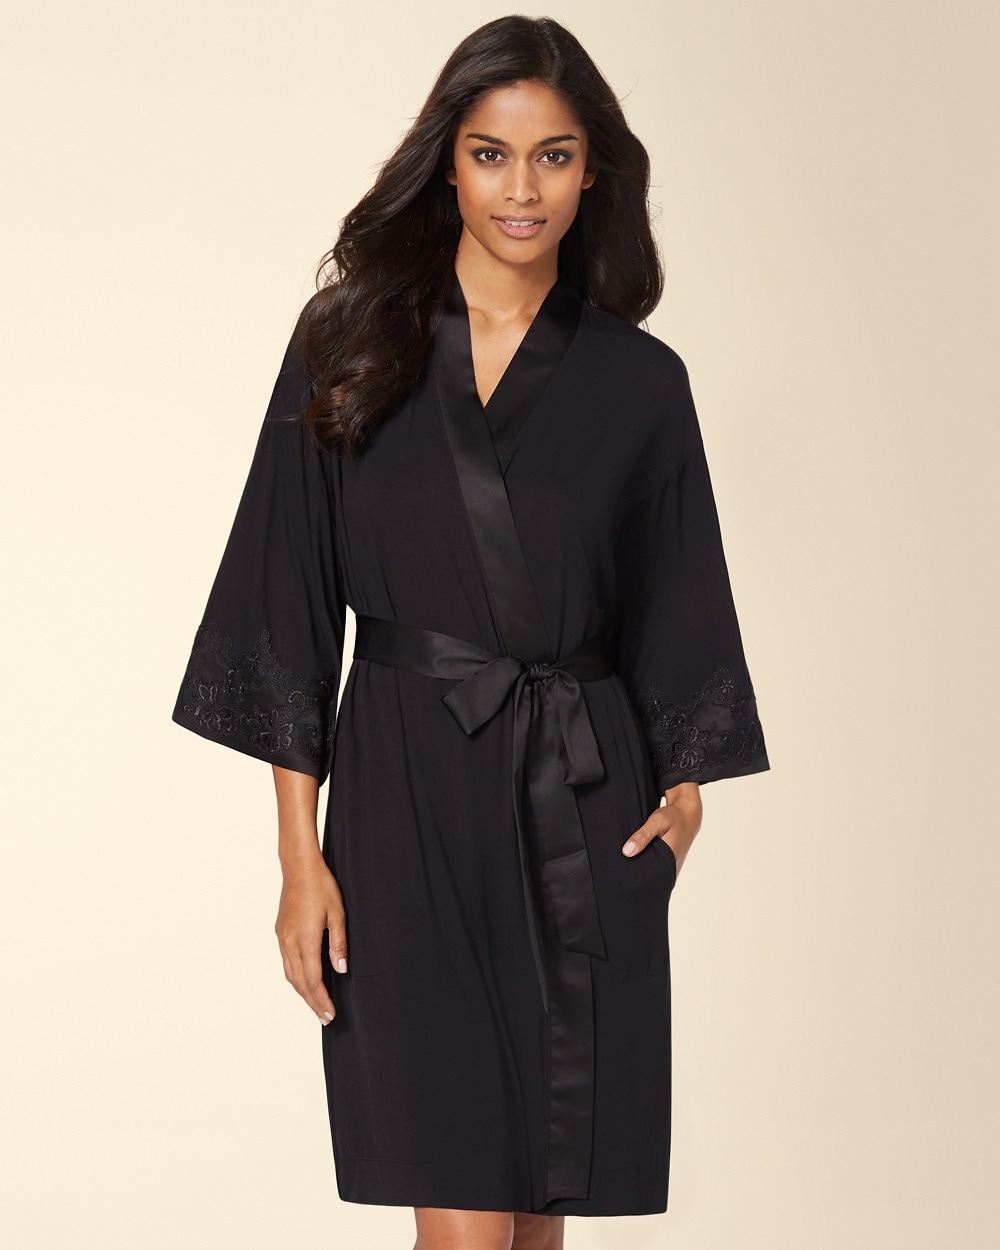 Limited Edition Desire Lace Short Robe Black